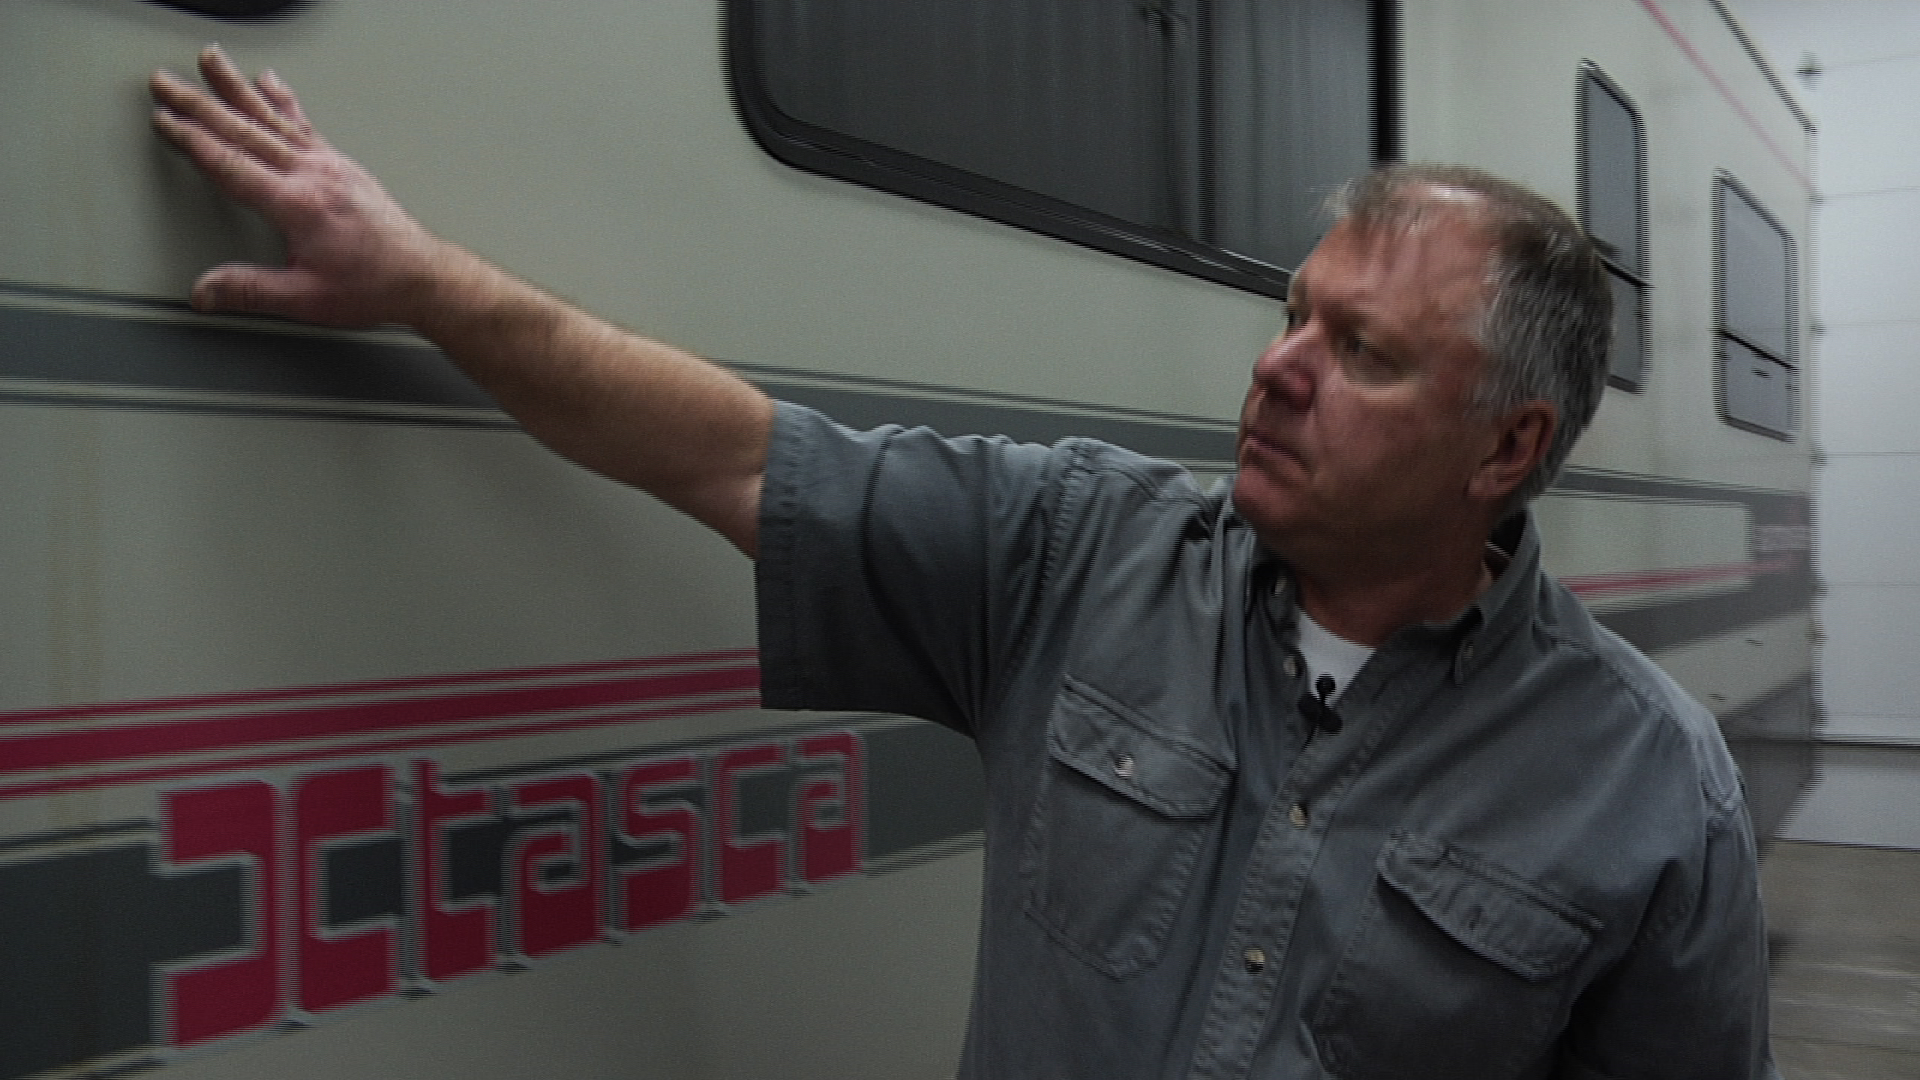 RV Inspection Tips: Side Area Maintenance product featured image thumbnail.